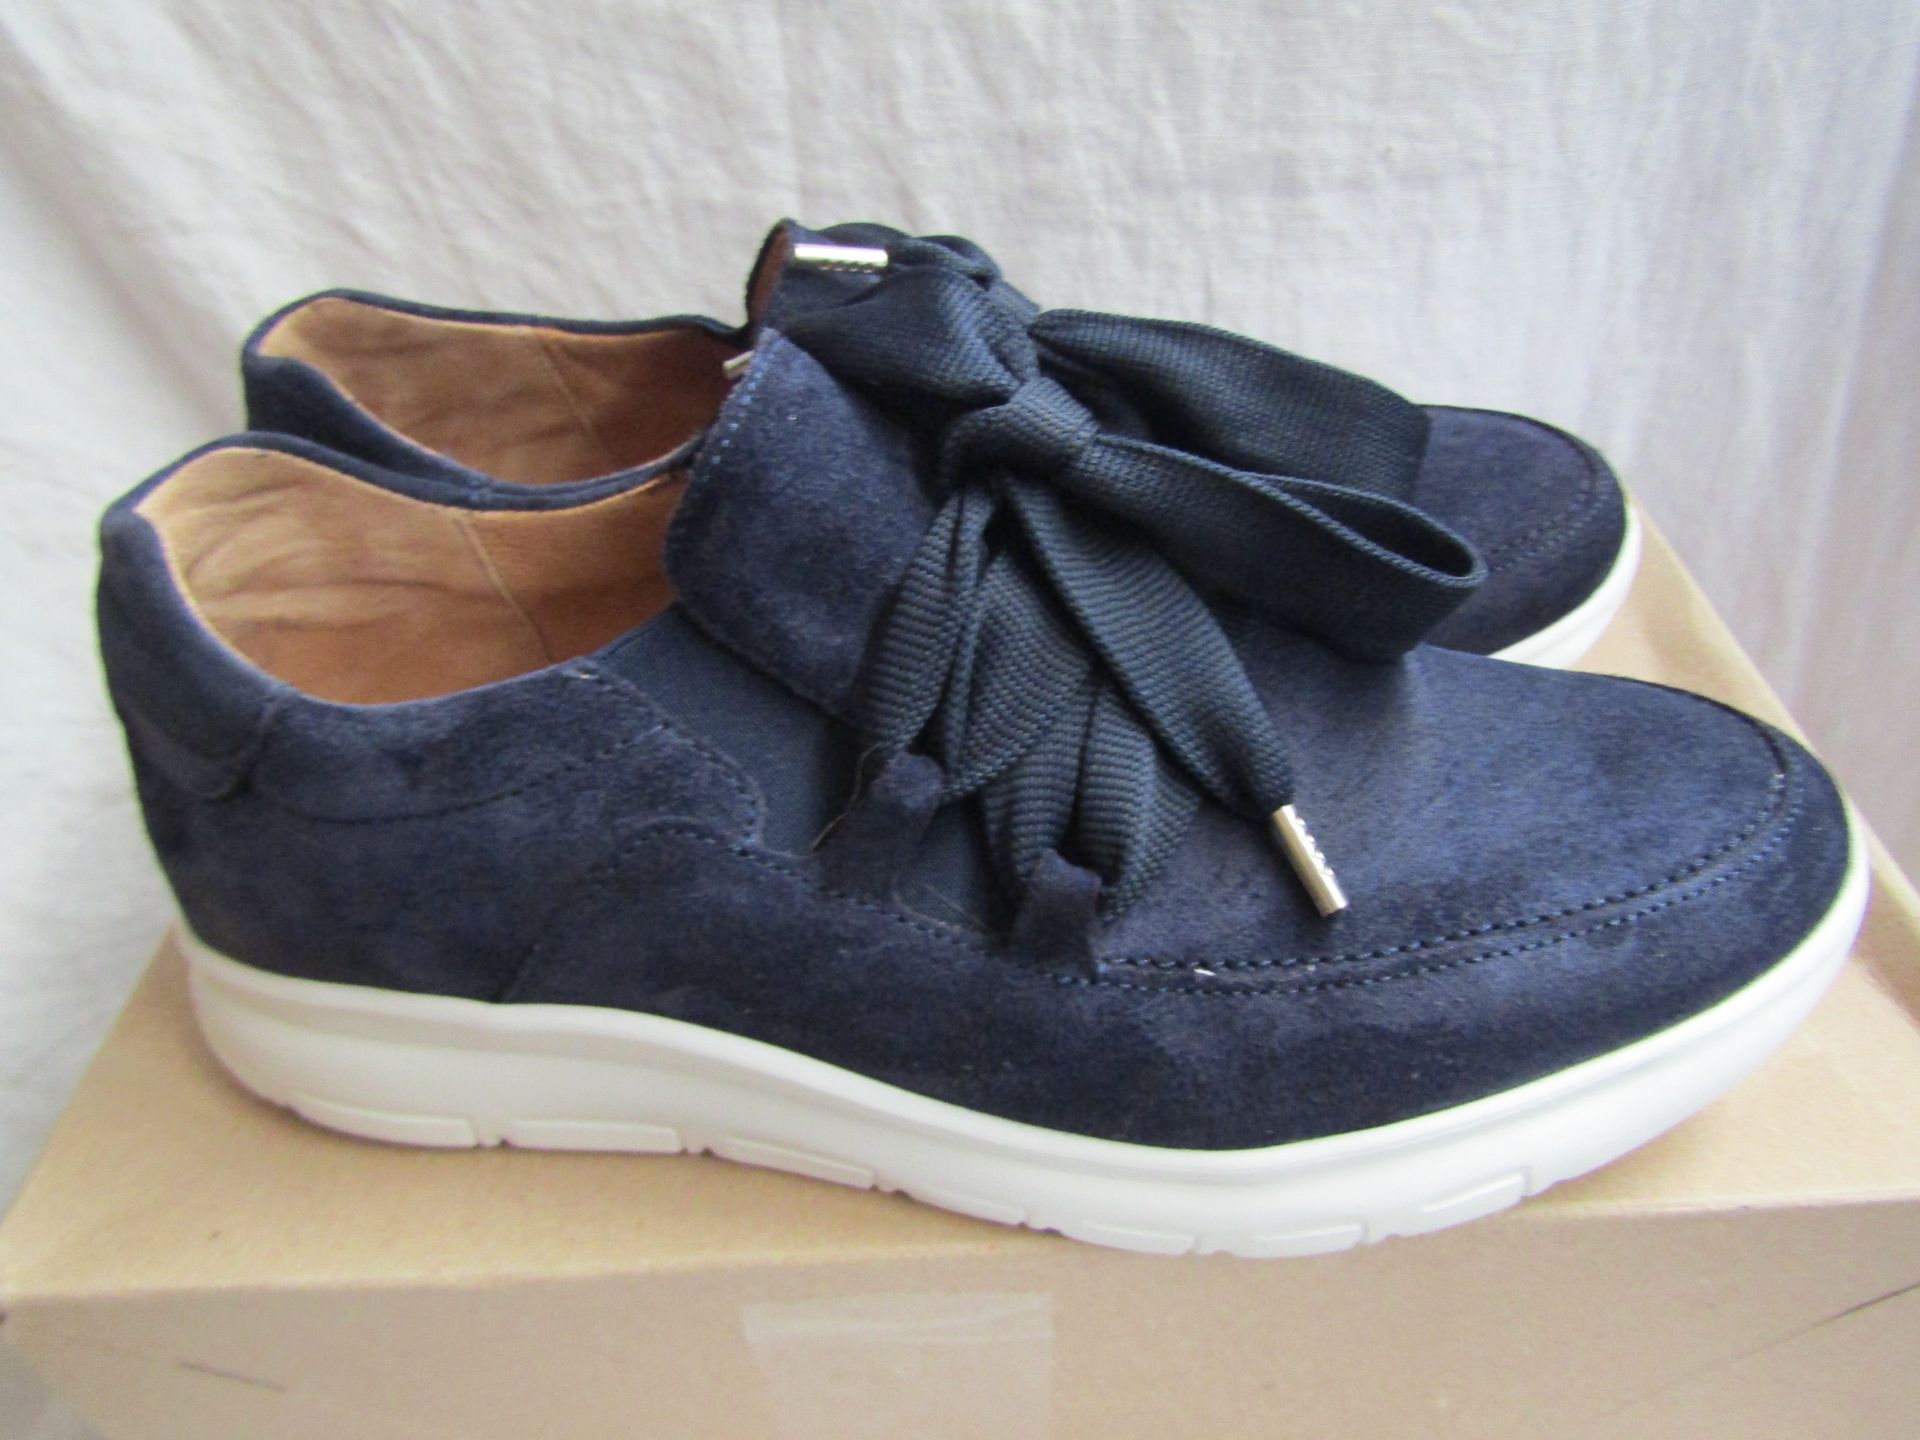 Gabor Navy Suede Shoe Size 6.5 May Have Been Worn Once or Twice Good Condition